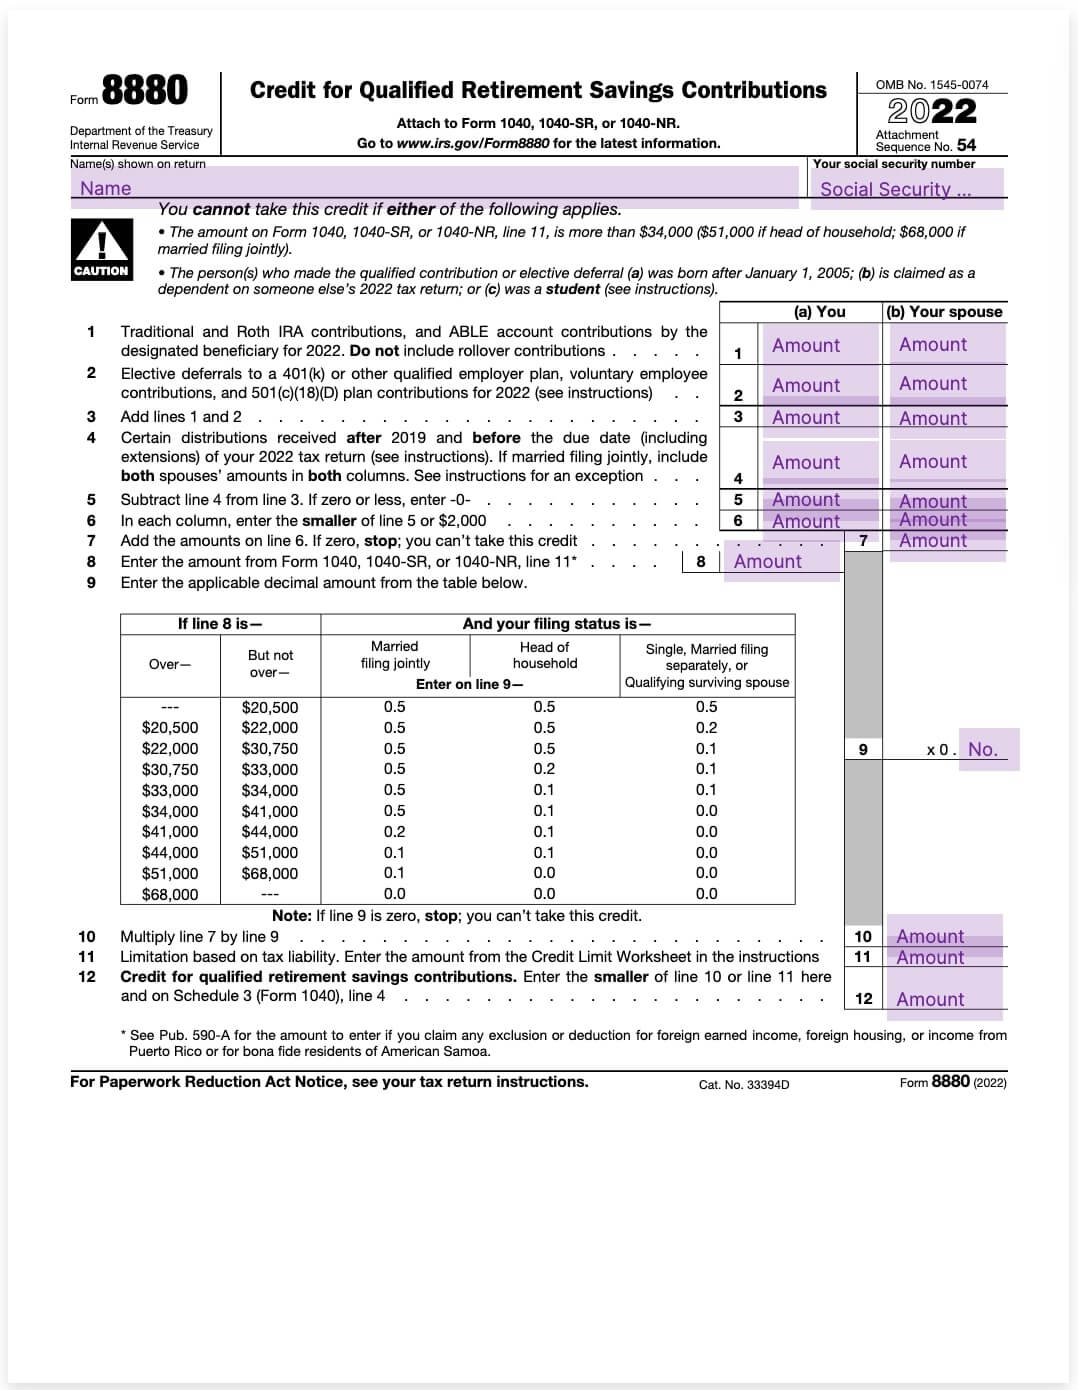 form 8880 credit for qualified retirement savings contributions template